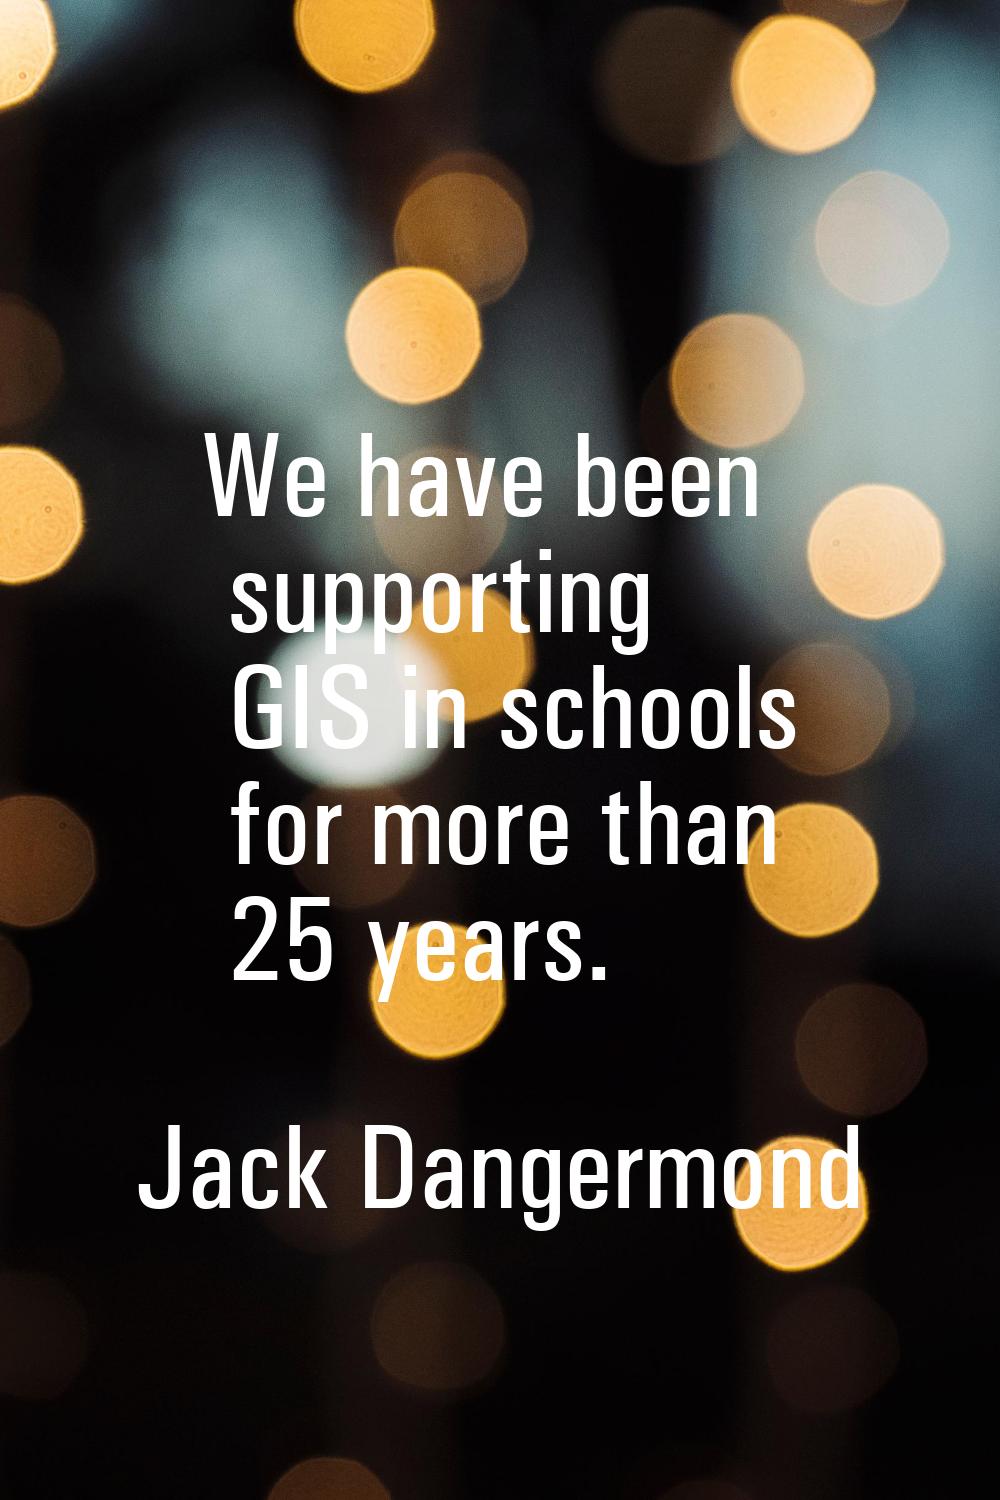 We have been supporting GIS in schools for more than 25 years.